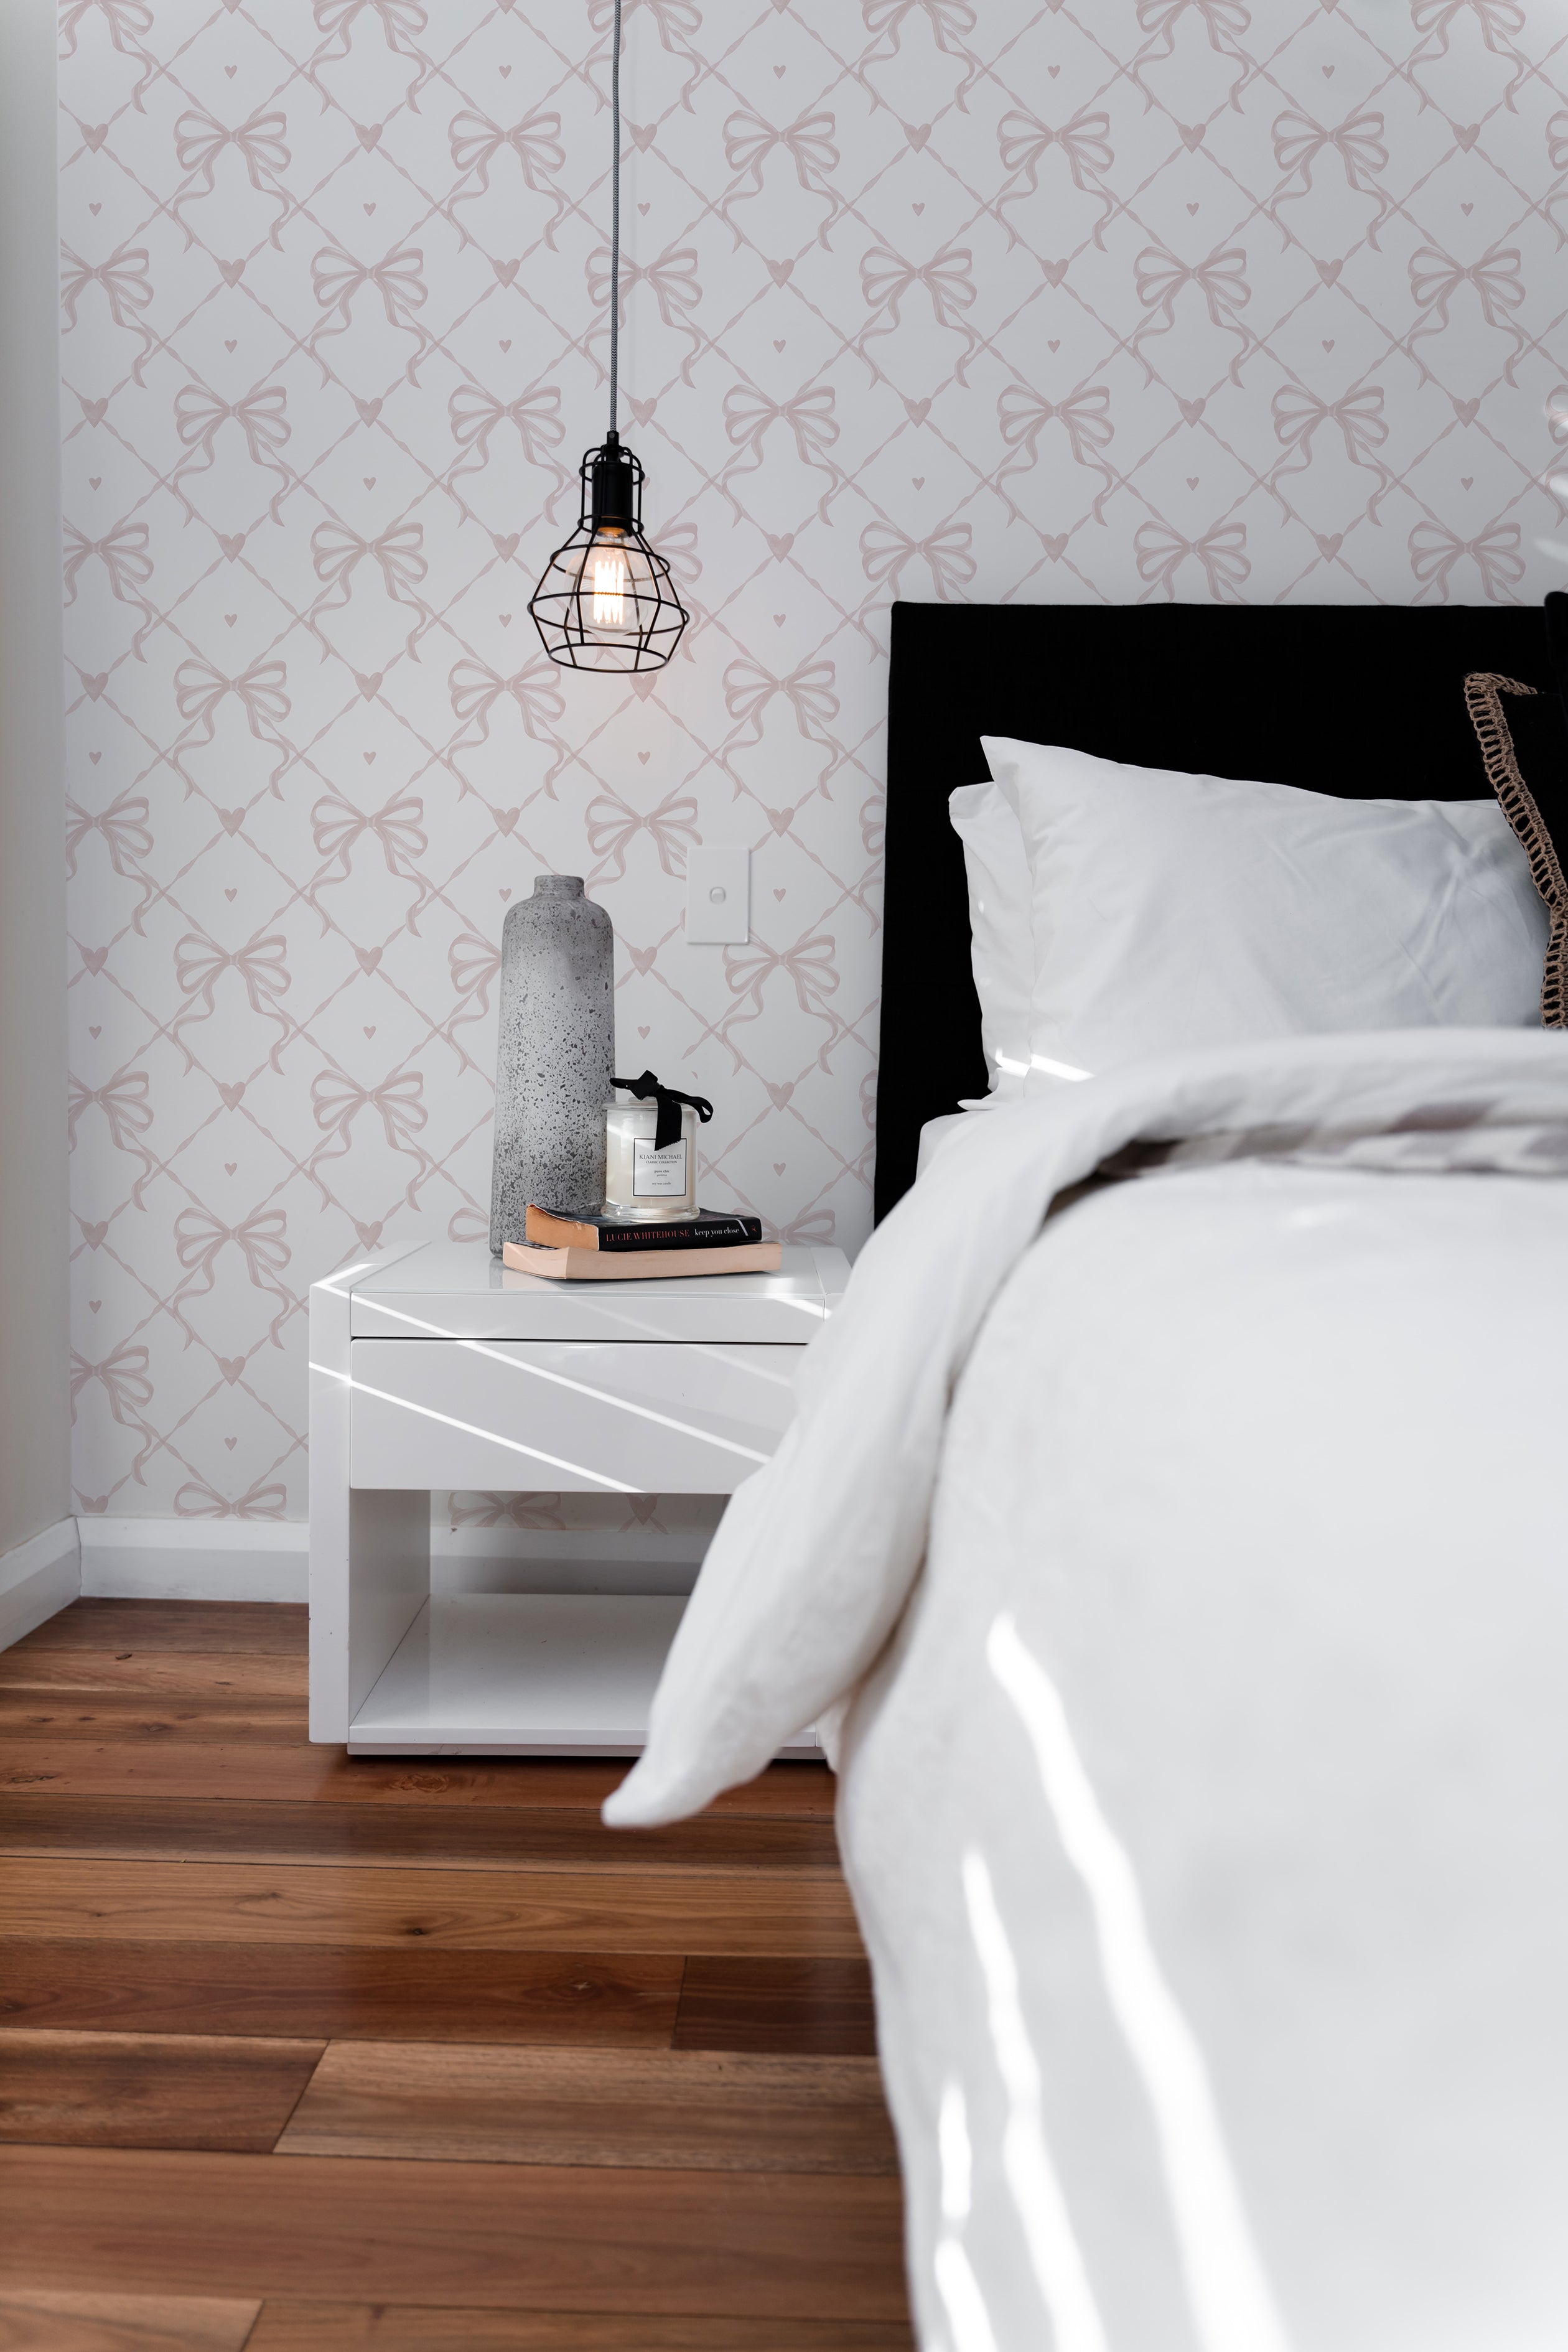 A modern bedroom featuring Delicate Watercolour Bows Wallpaper with a pattern of light pink bows and hearts on a white background. The elegant wallpaper enhances the room's aesthetic, complemented by a black headboard, white bedding, and a minimalist bedside table.